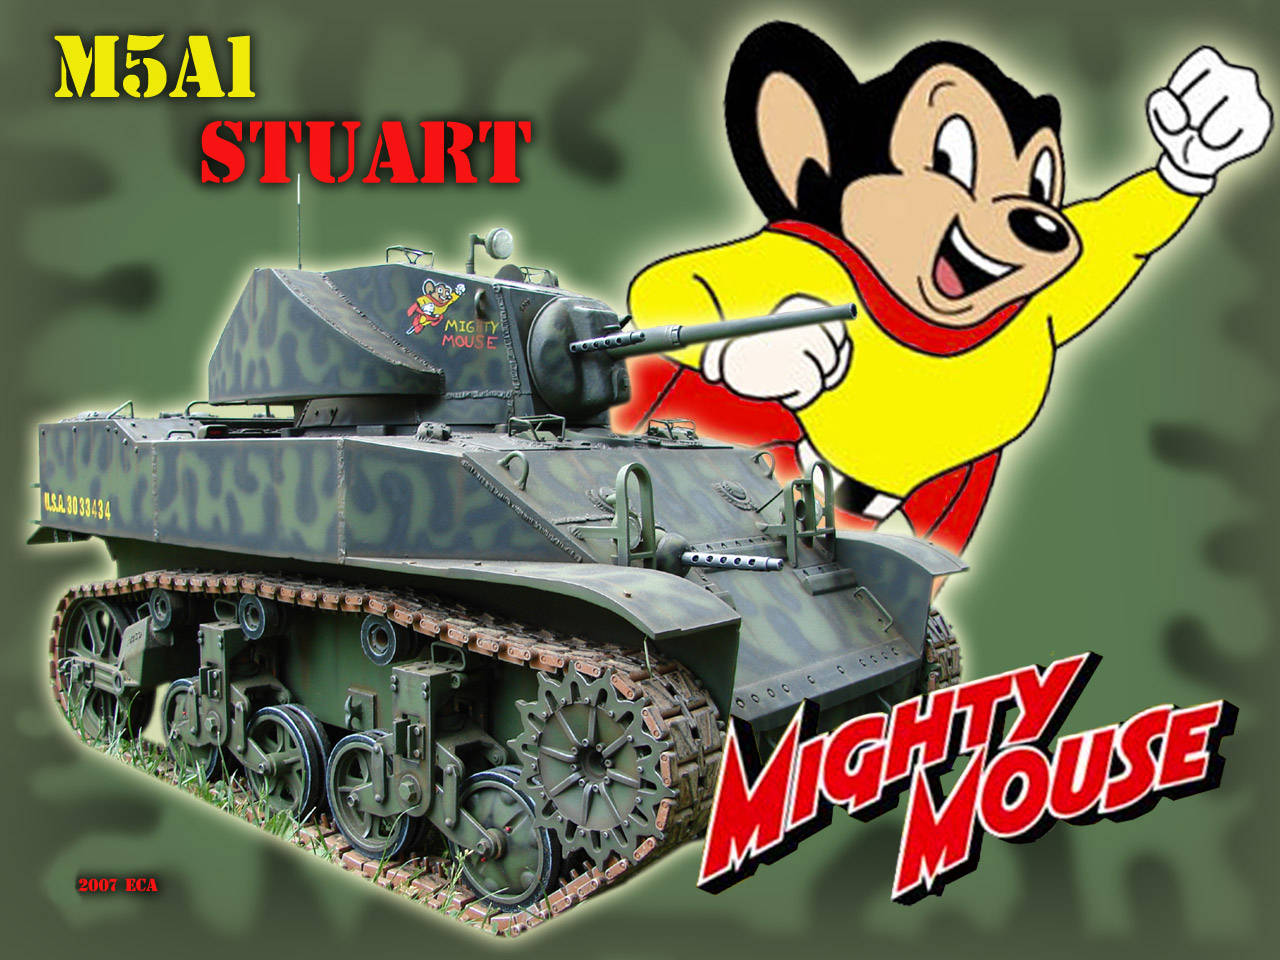 Mighty Mouse With M5a1 Stuart Background